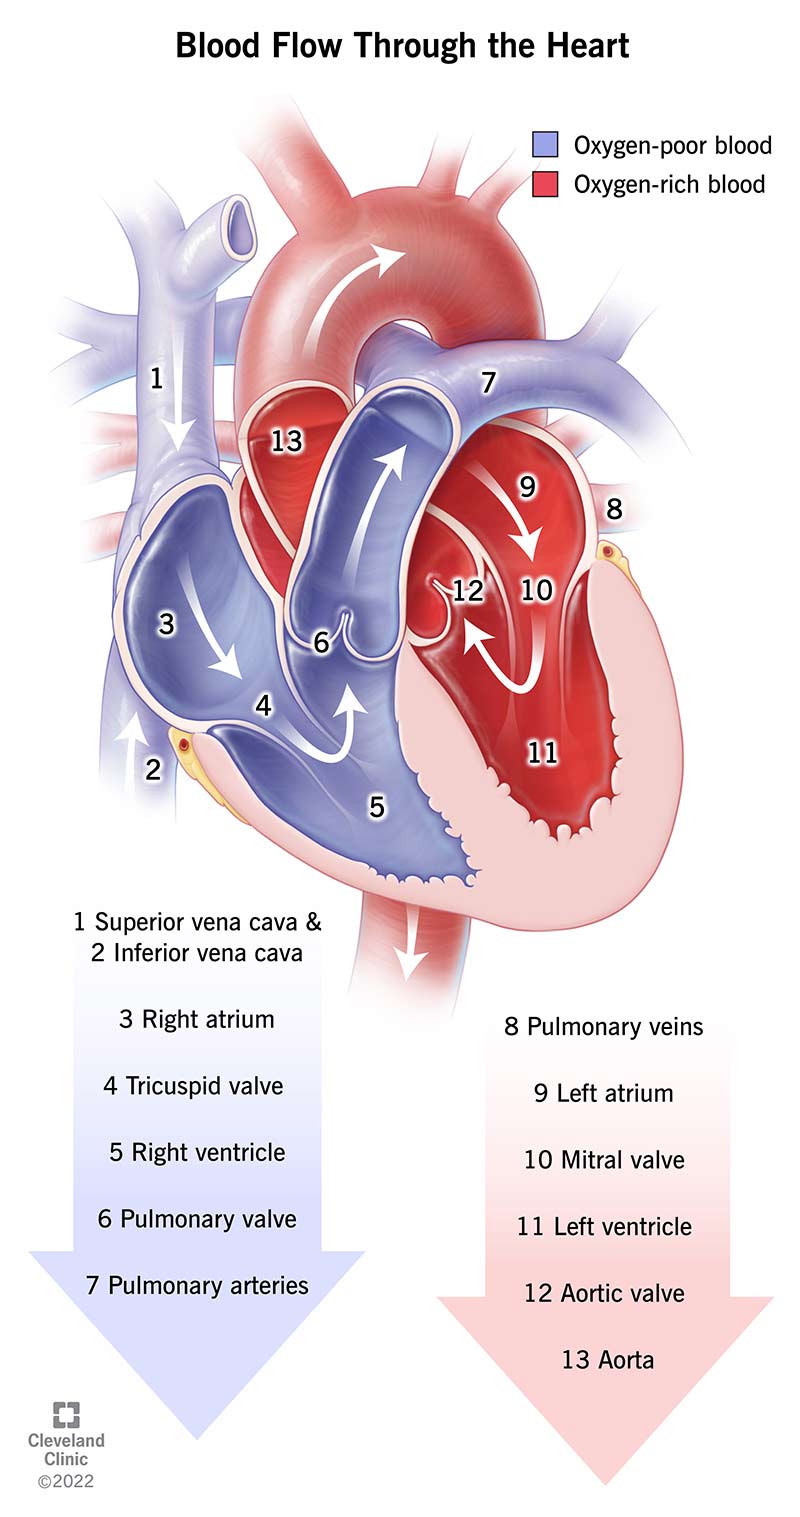 Blood flows through the heart in a series of arteries, ventricles, veins and valves.